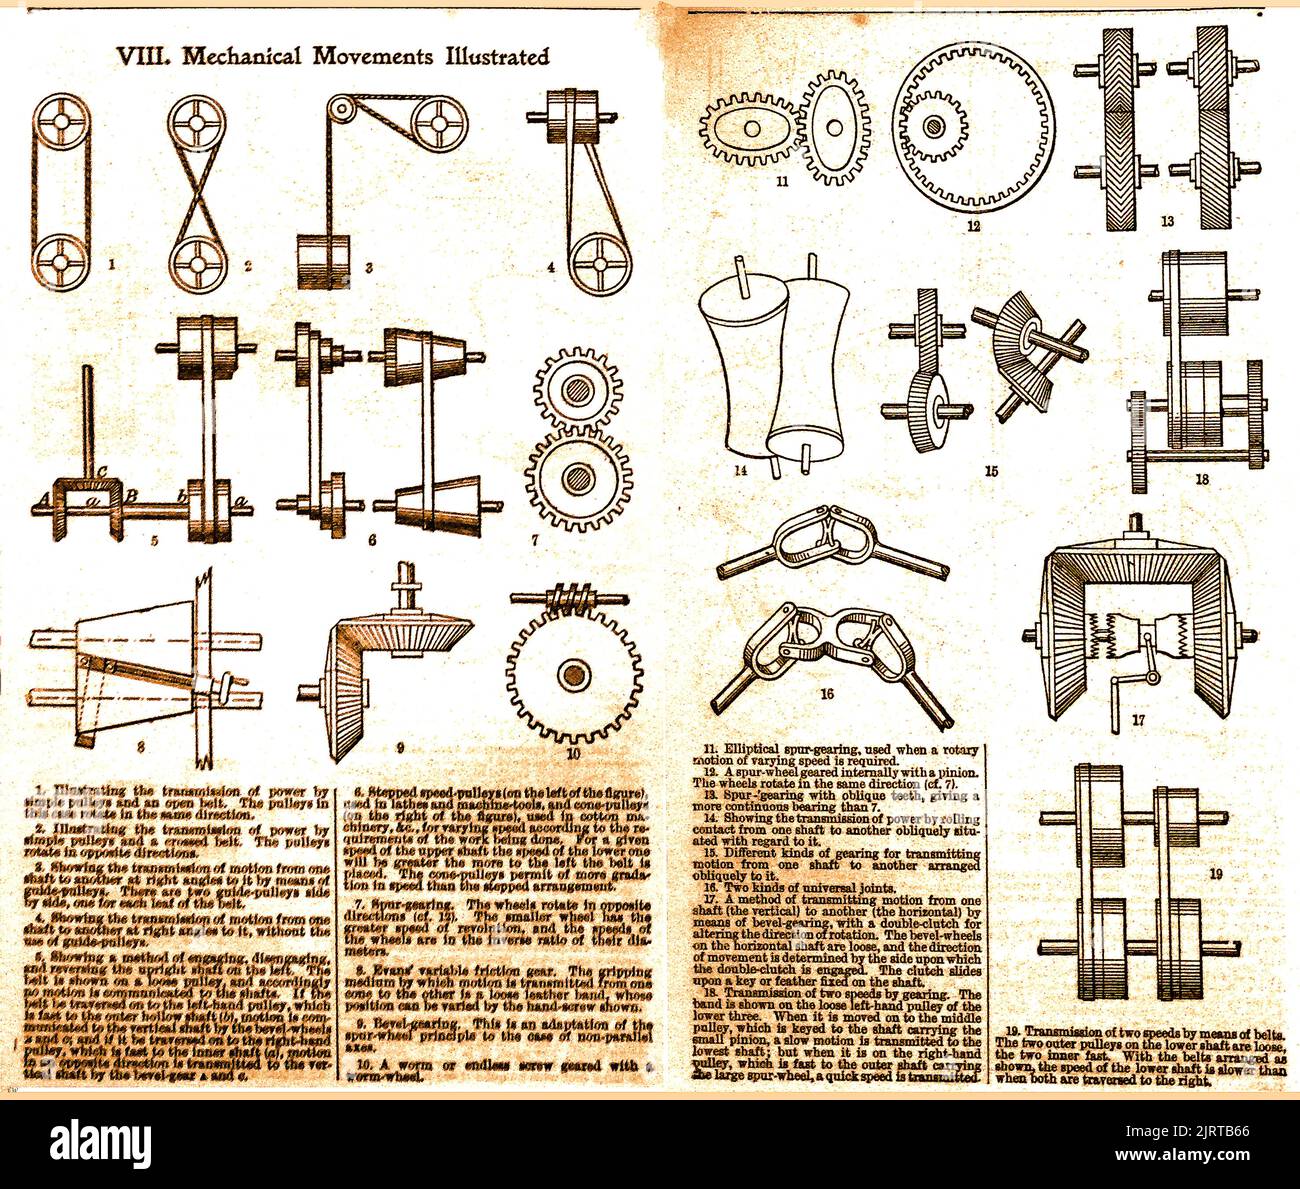 An historical illustration showing mechanical movements commonly in use and explaining their uses. Stock Photo